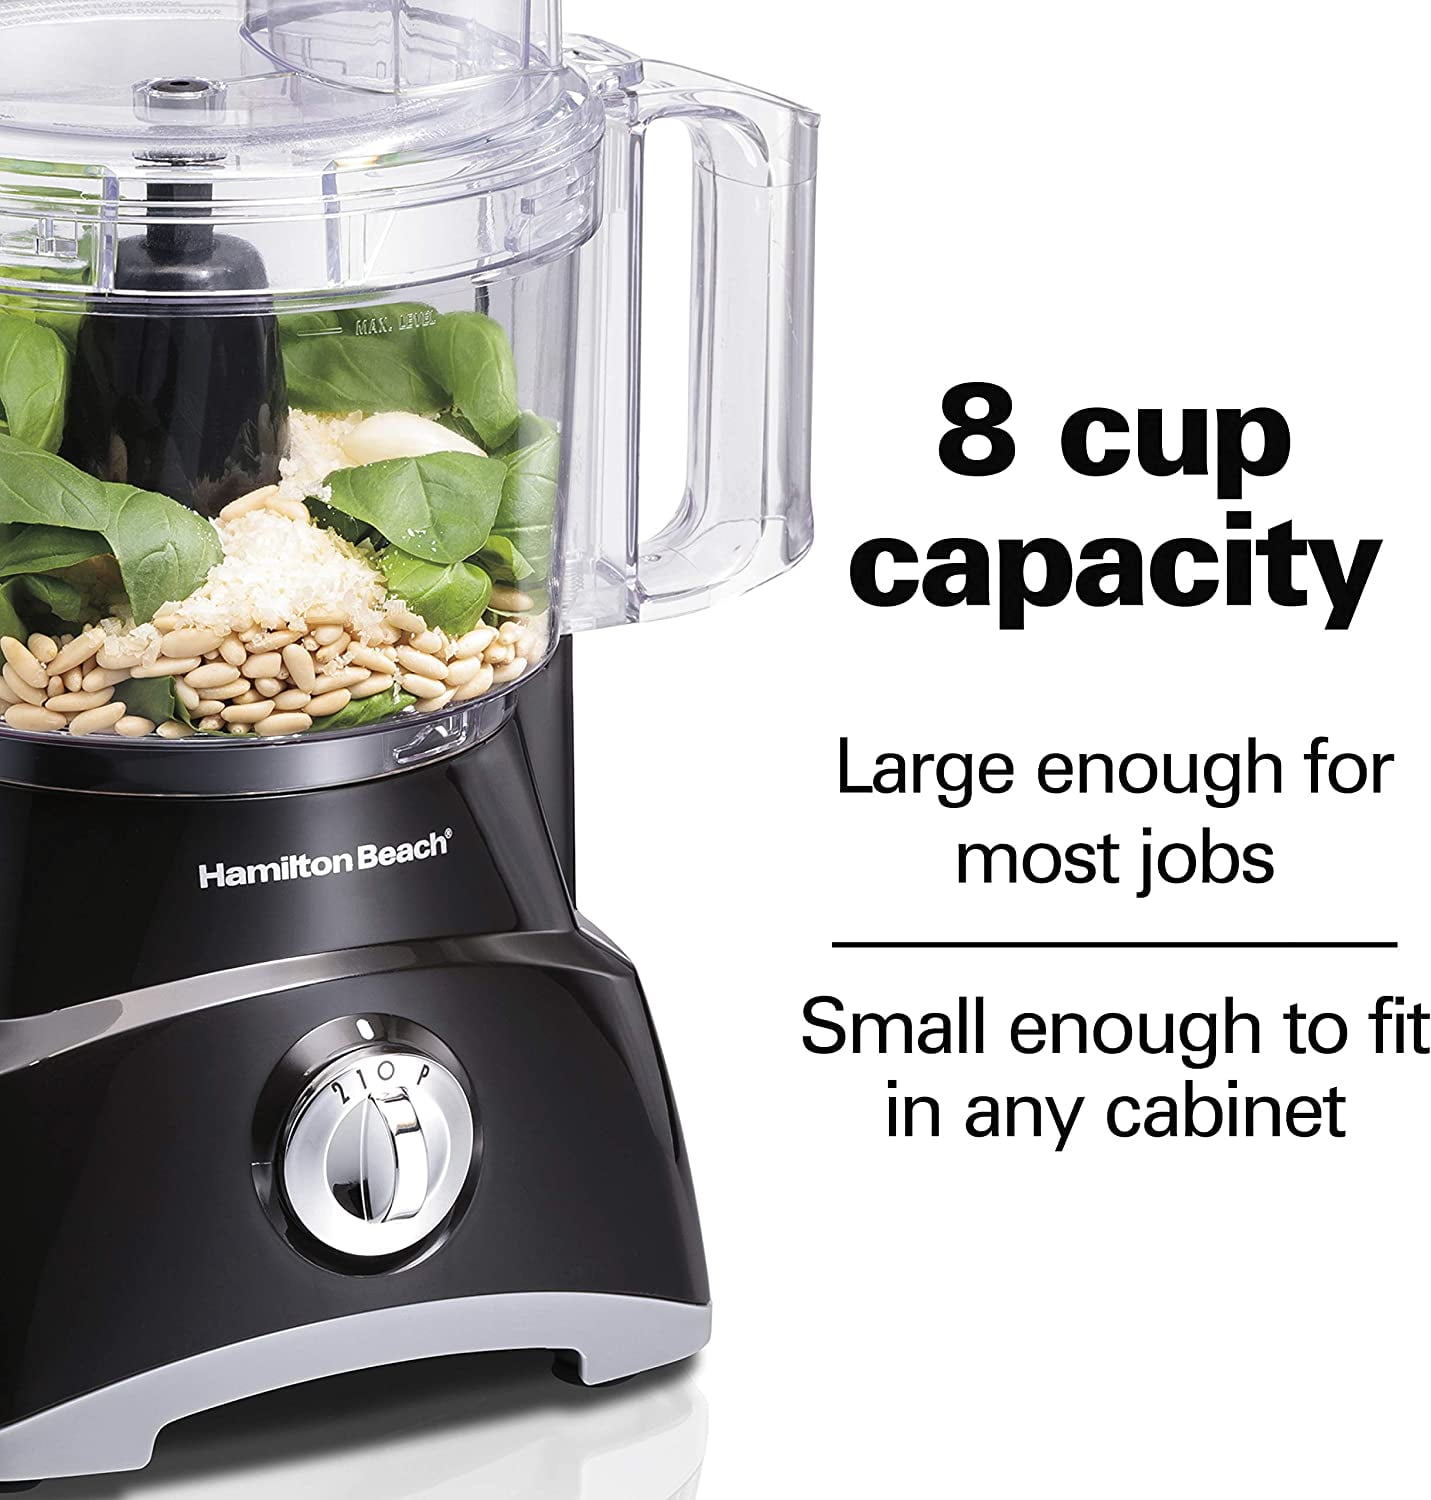 Hamilton Beach Stack & Snap Food Processor and Vegetable Chopper, BPA Free,  Stainless Steel Blades, 12 Cup Bowl, 2-Speed 450 Watt Motor, Black (70725A  for Sale in Arlington, TX - OfferUp